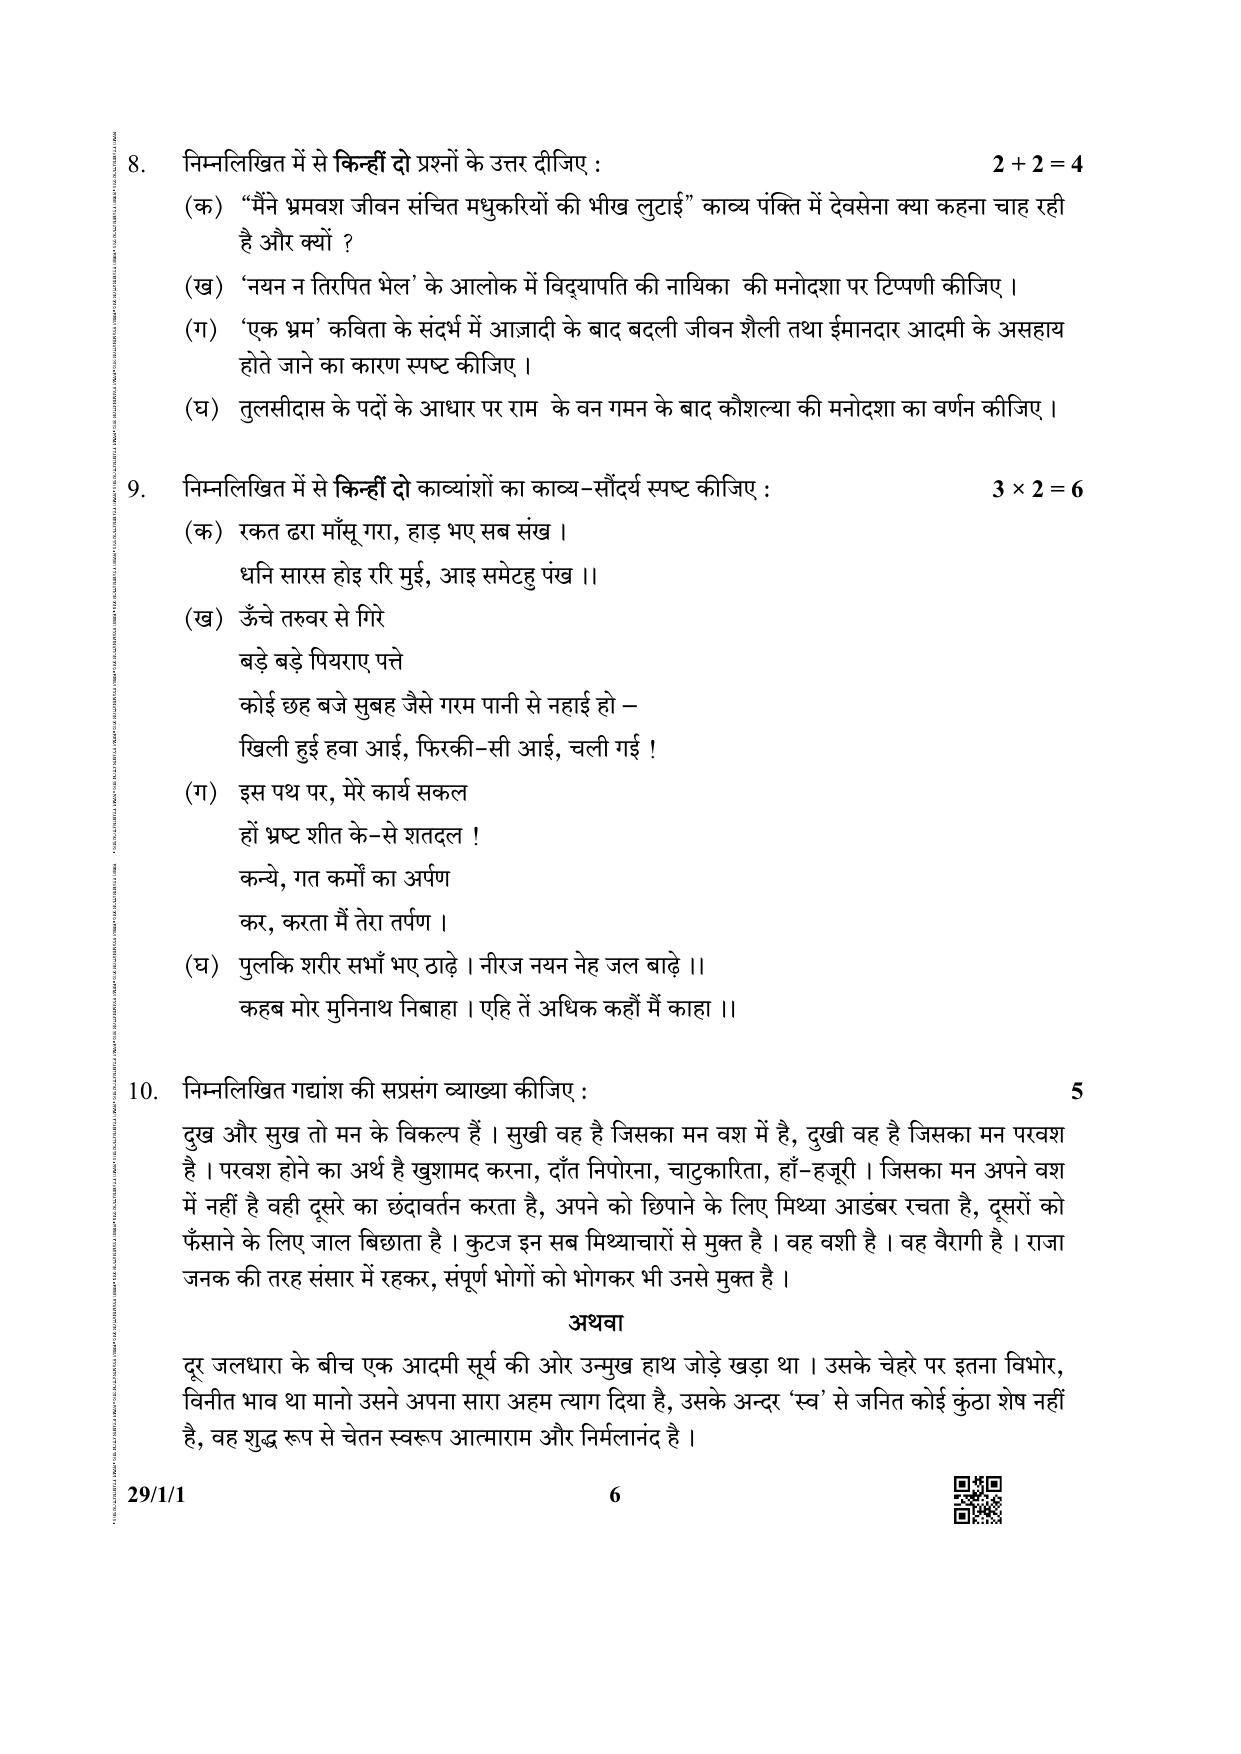 CBSE Class 12 29-1-1 (Hindi ELECTIVE) 2019 Question Paper - Page 6